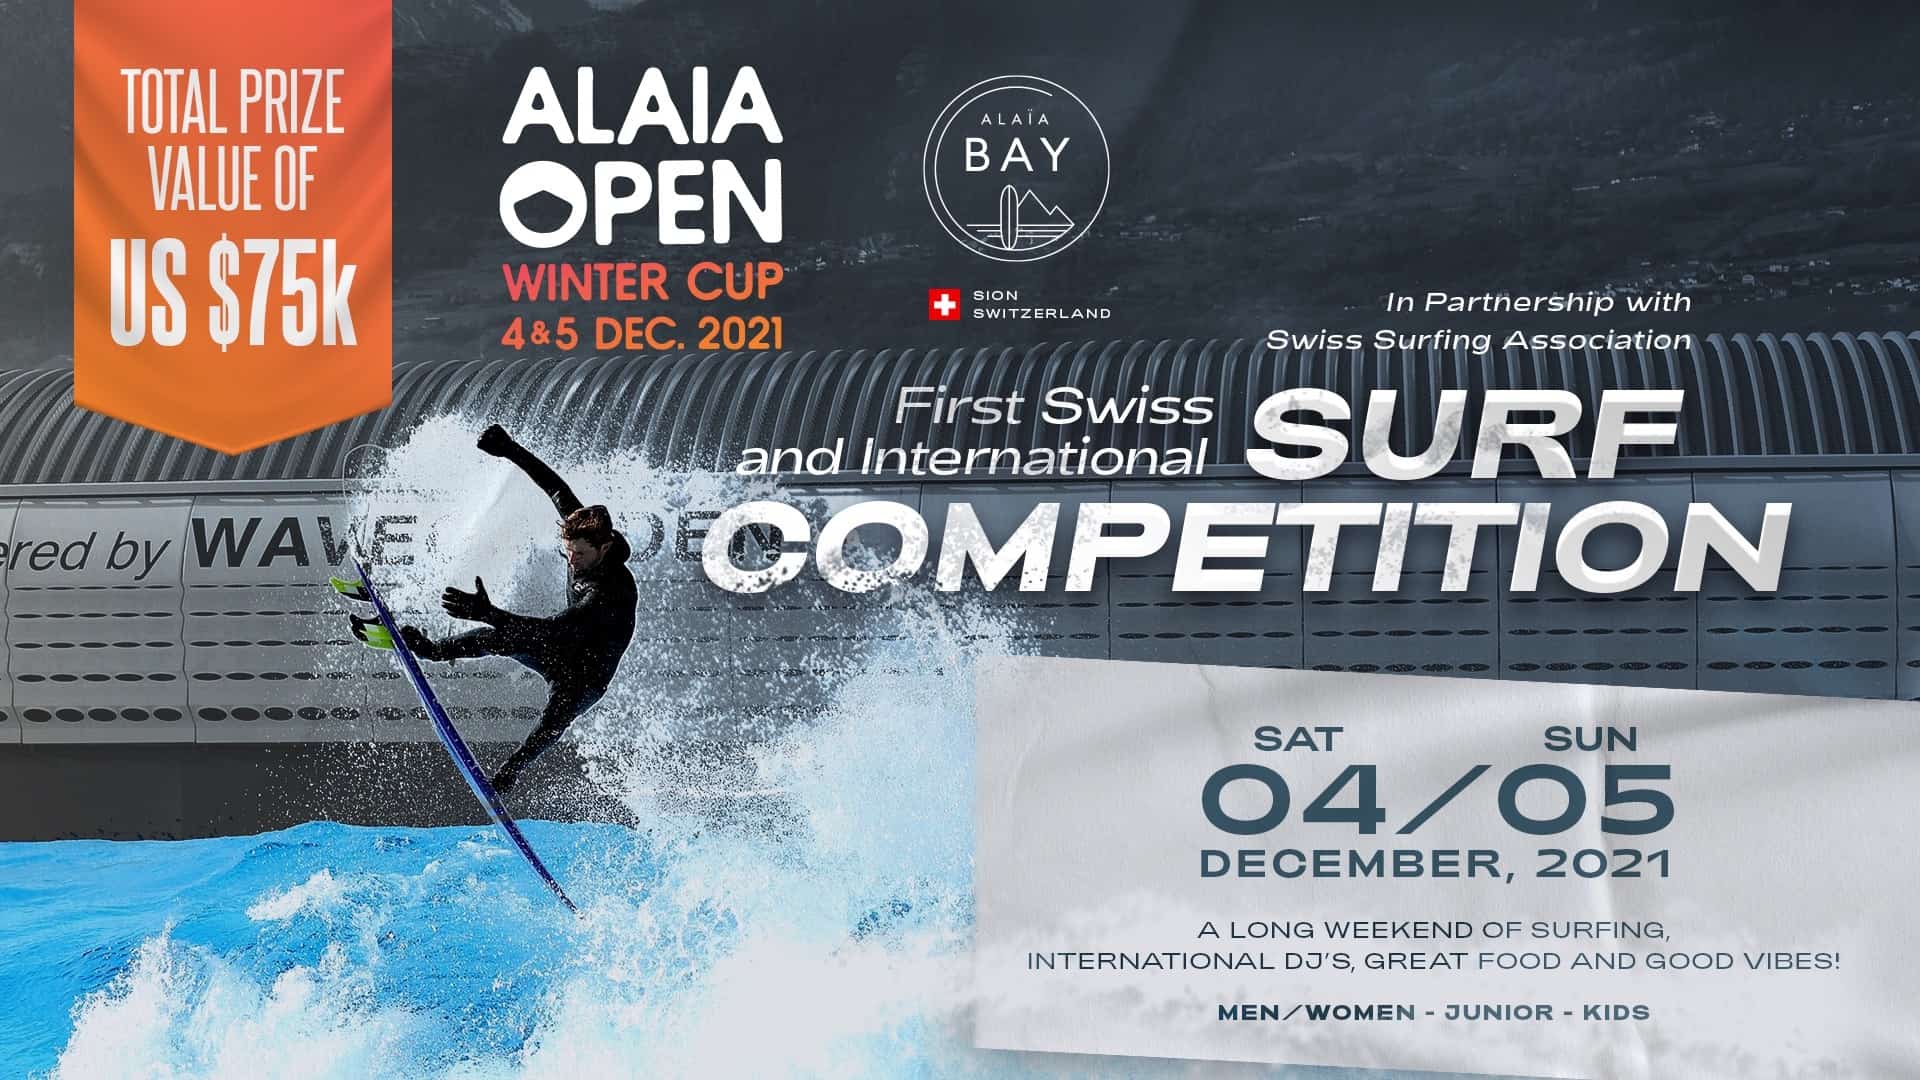 Alaïa Open Winter Cup 2021 - Alaia Bay Wave Pool Surf Competition